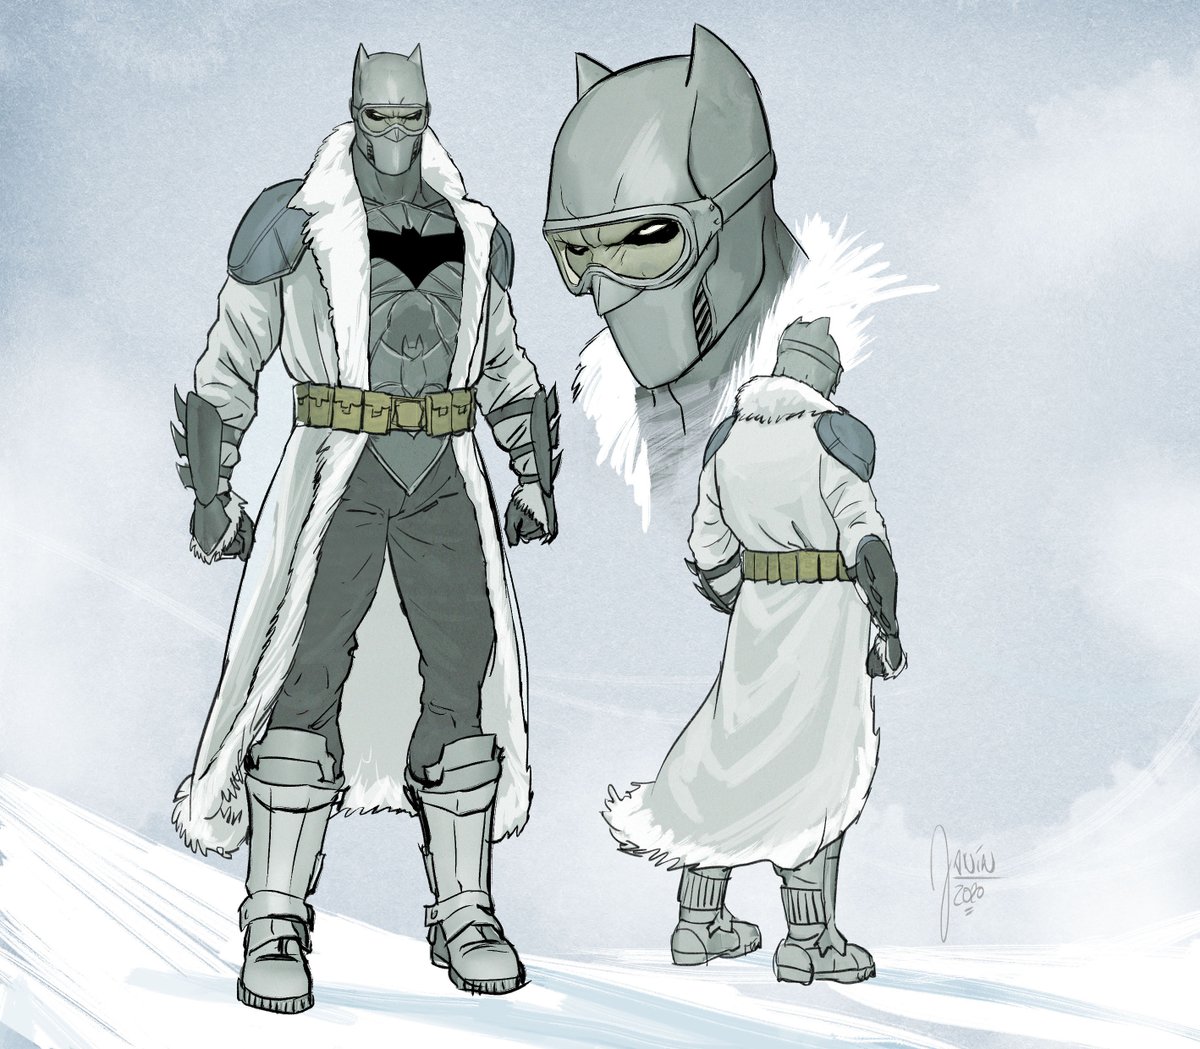 「Also, Batman Endless Winter! Action figu」|Mikel Janínのイラスト